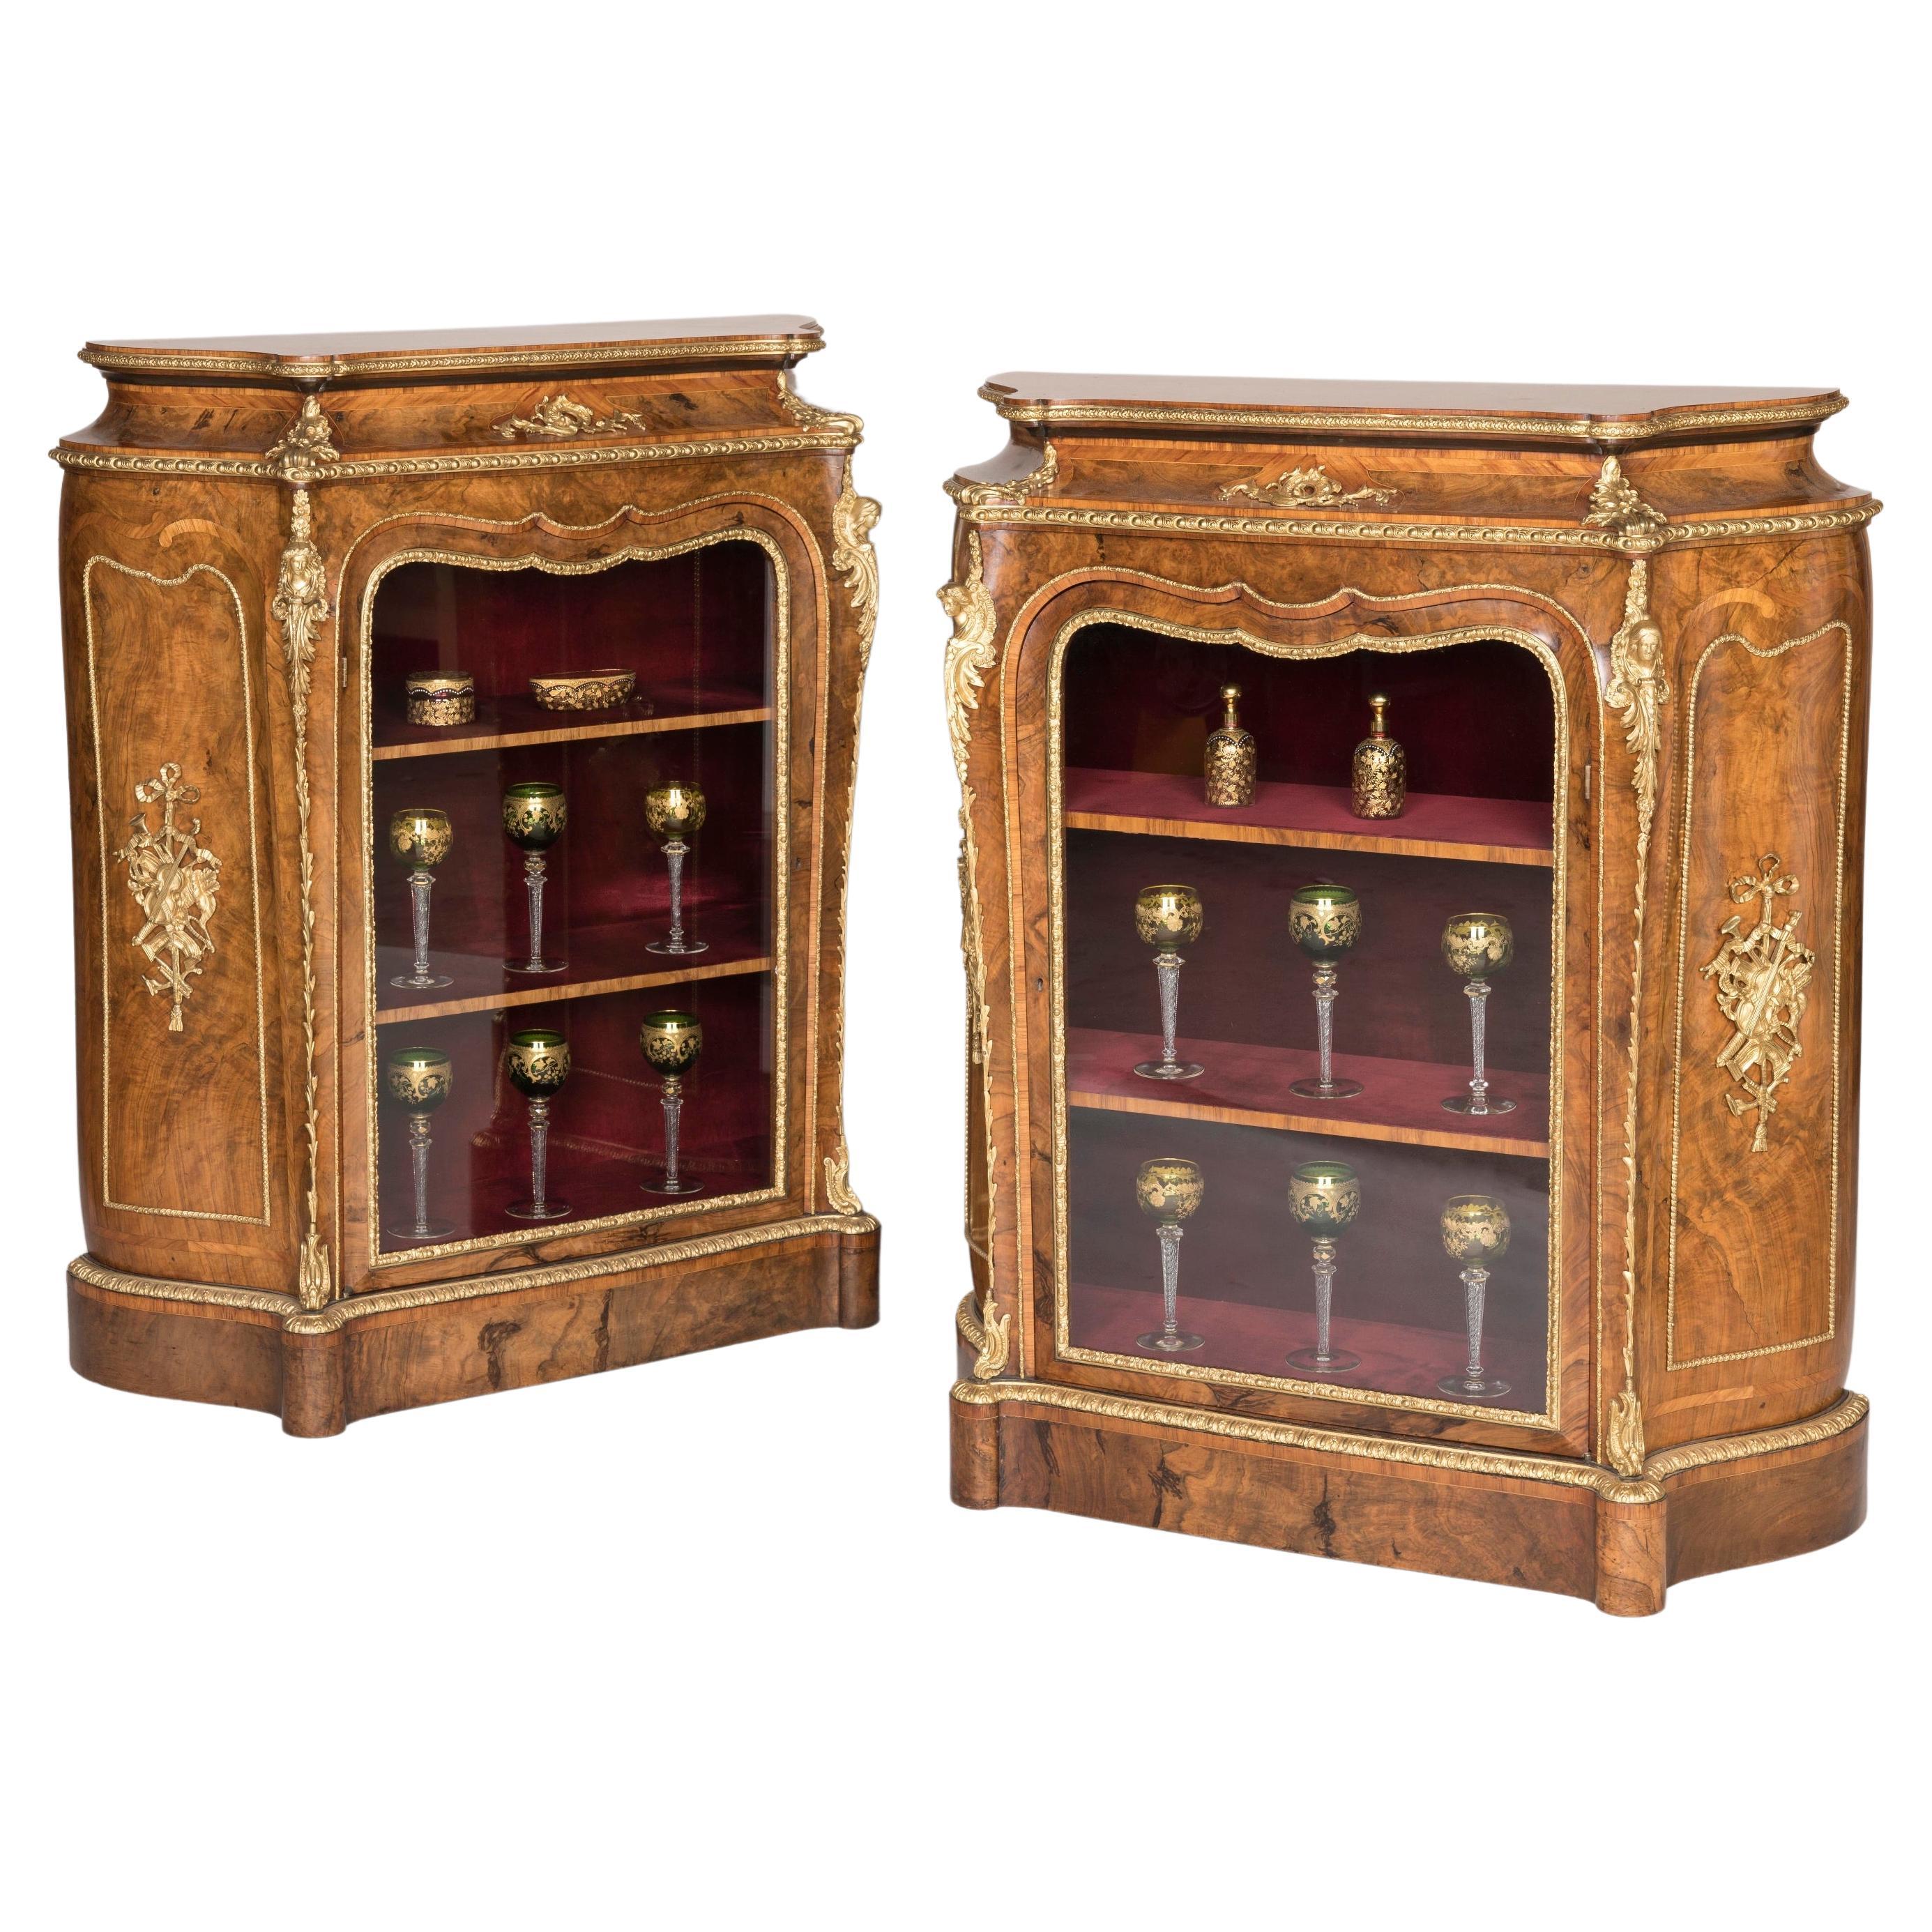 Mid-19th Century Pair of Figured Burr Walnut and Glass Panel Cabinets by Gillows